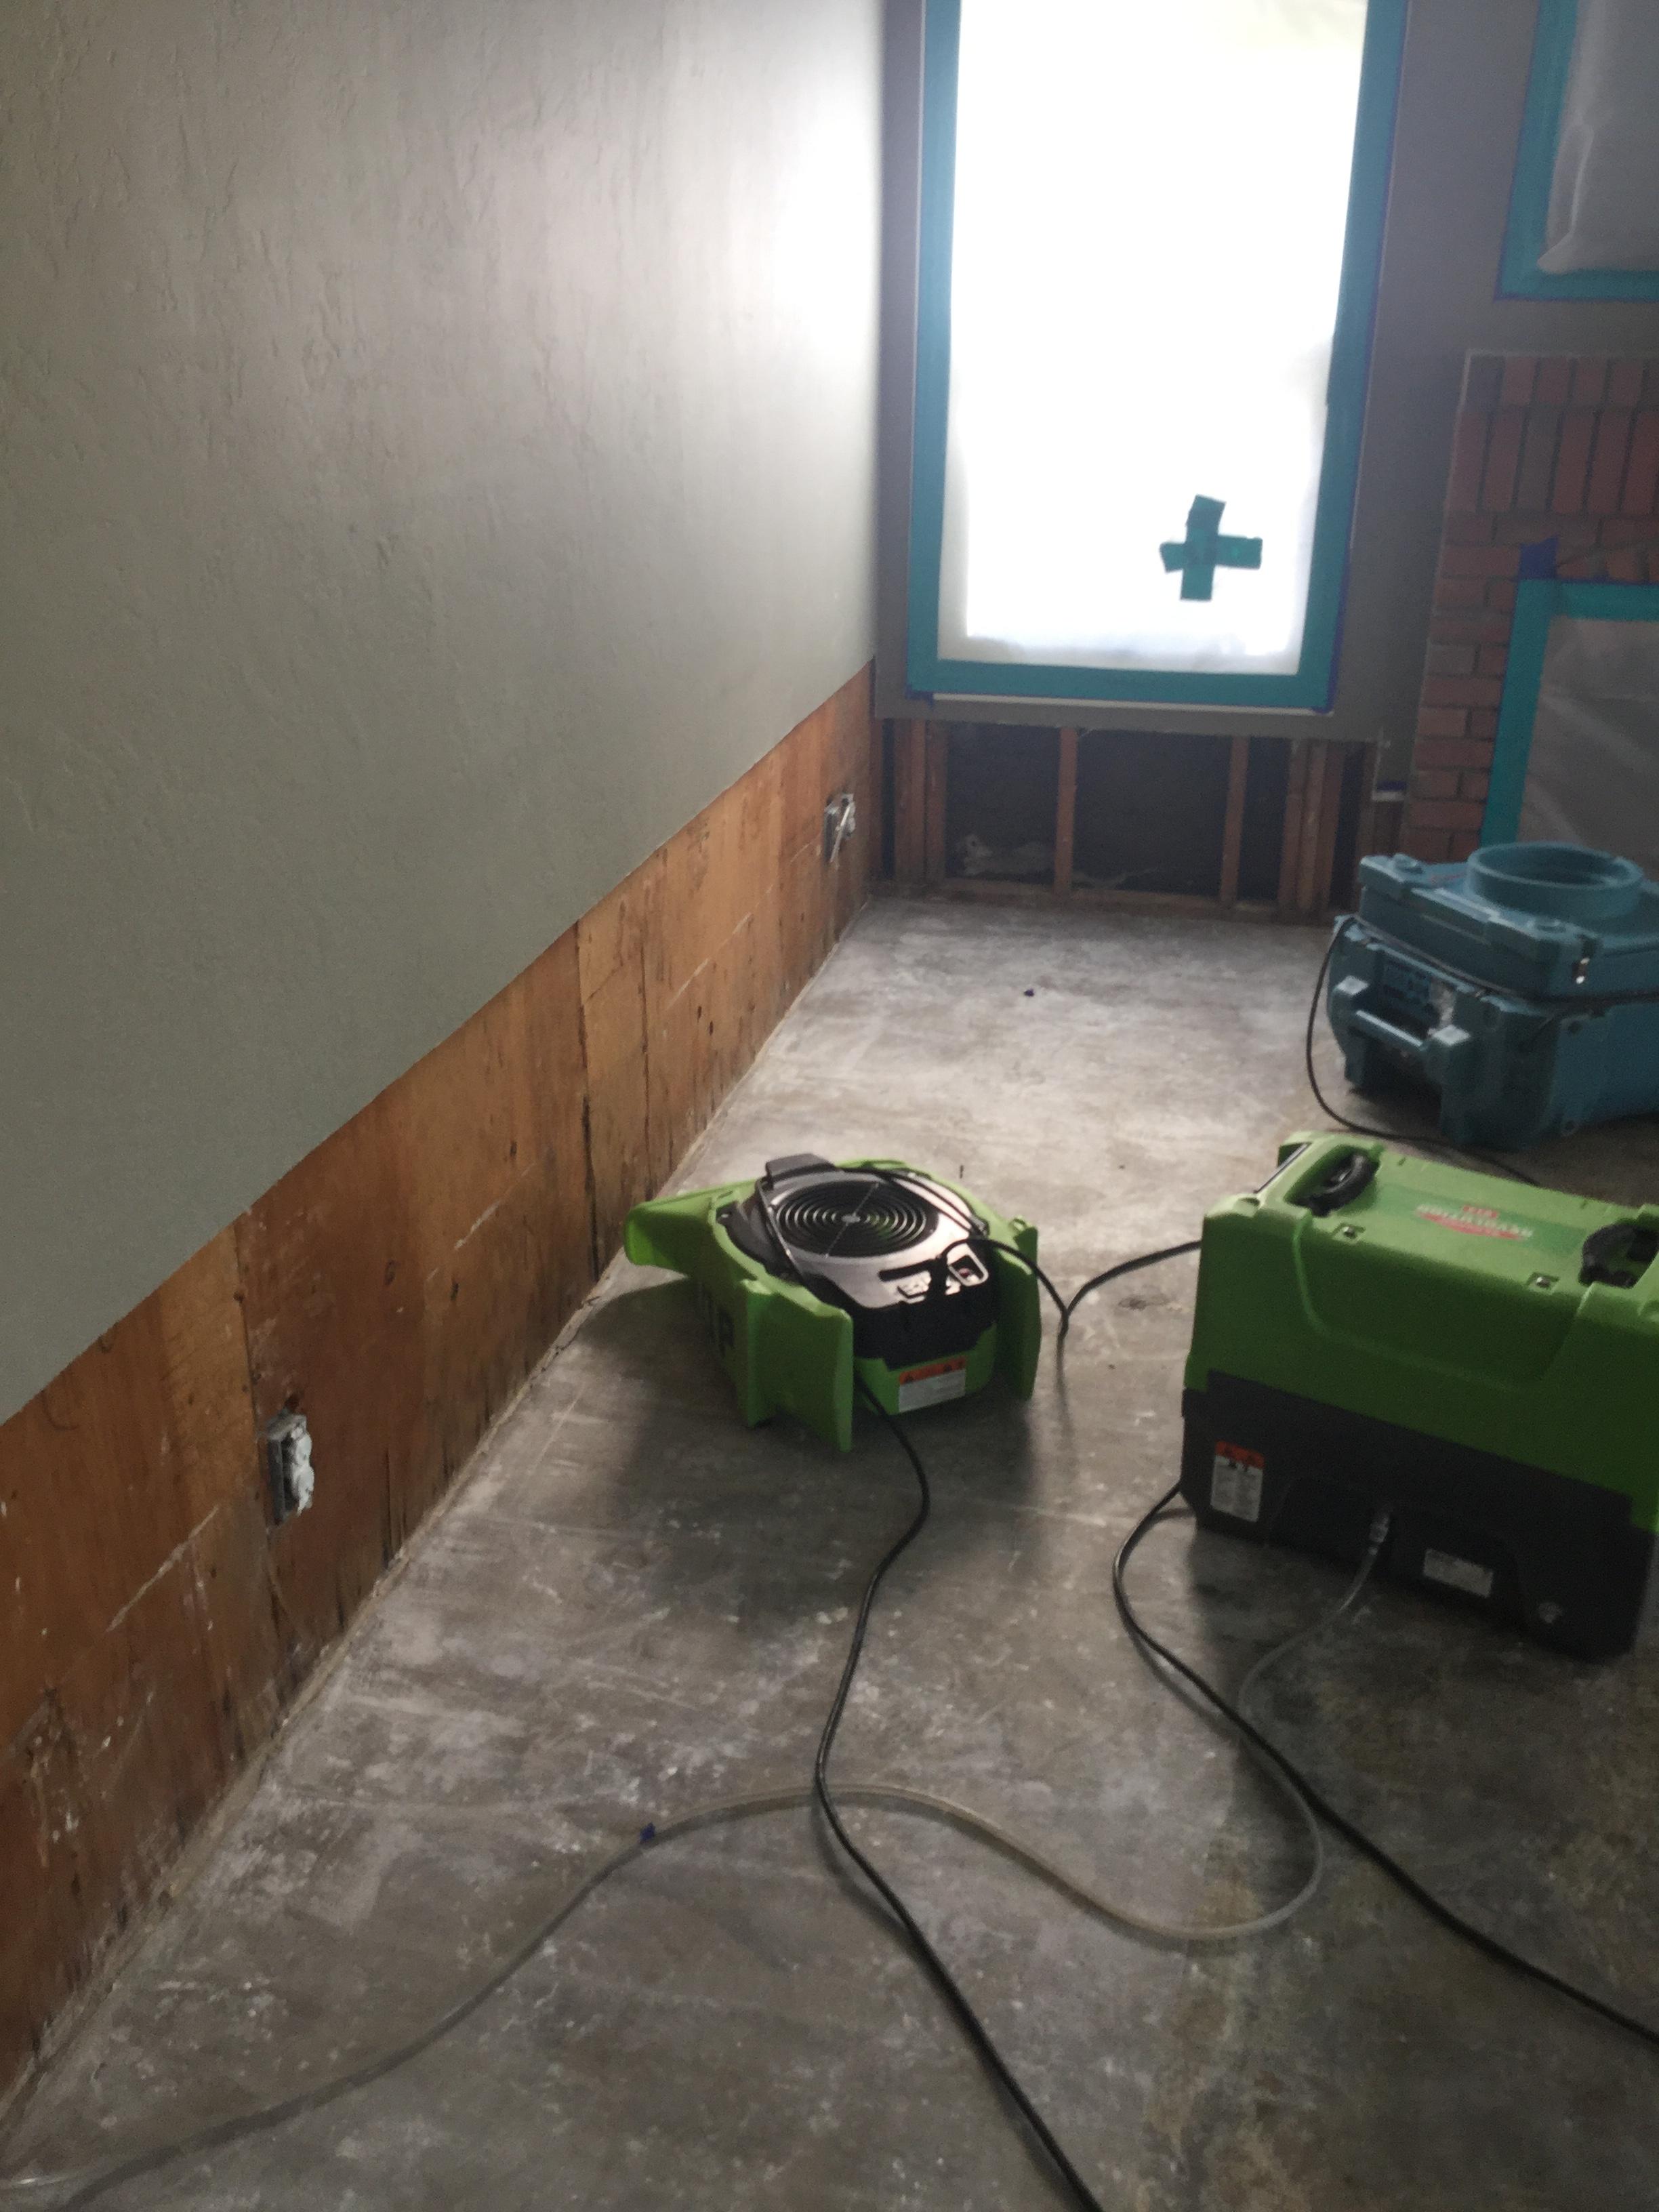 The SERVPRO equipment is up and running during a residential restoration.